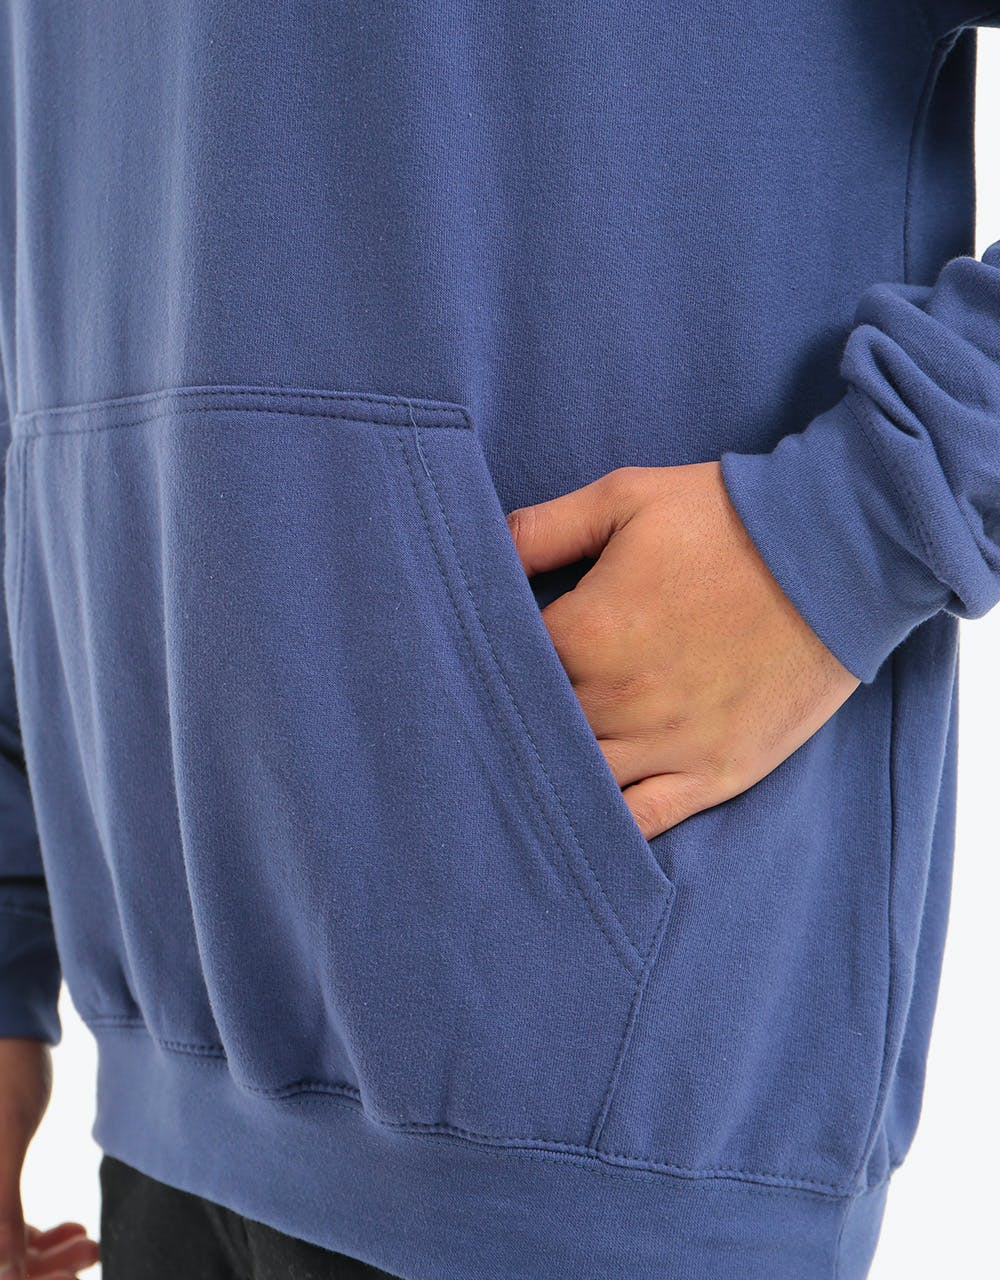 Route One The Other Side Pullover Hoodie - Denim Blue